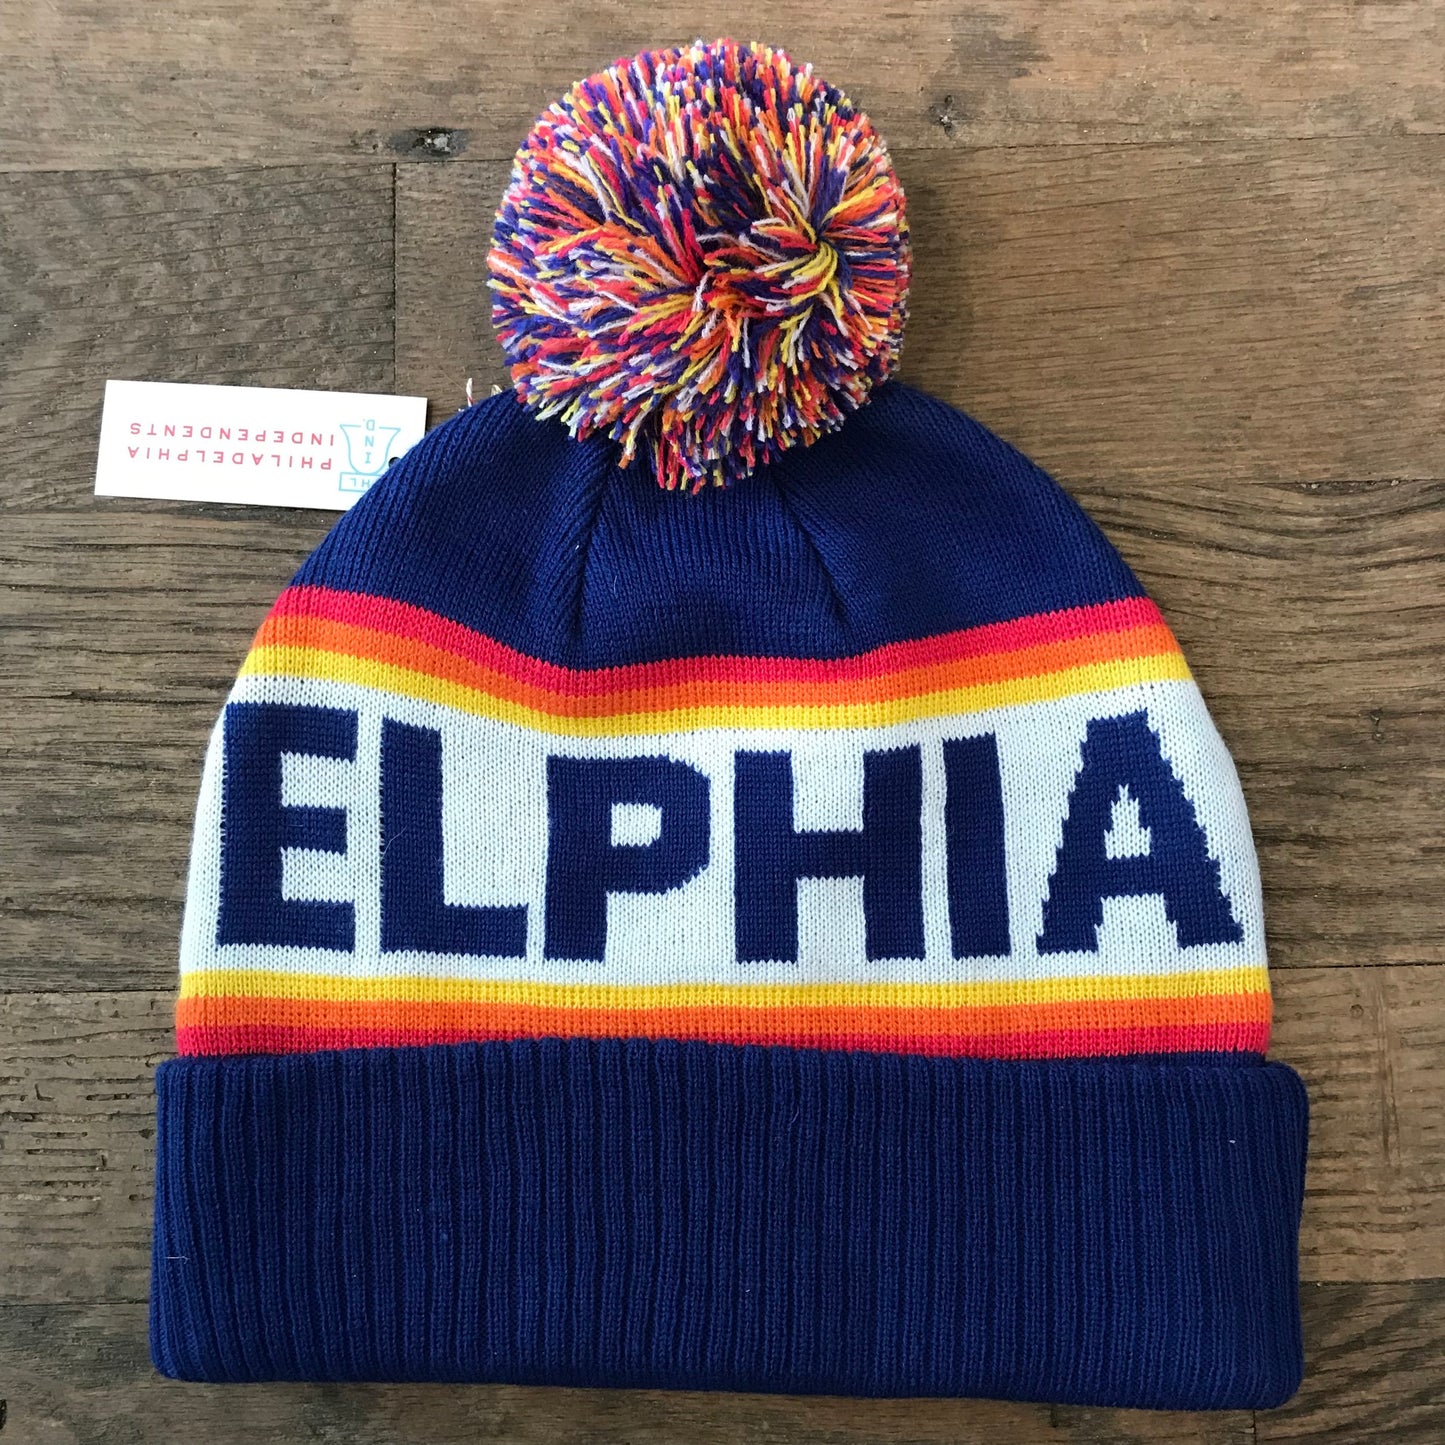 A colorful double-sided knit hat with a pompom on top and the word "Philadelphia Beanie," symbolizing the City of Brotherly Love, emblazoned on the brim by South Fellini.